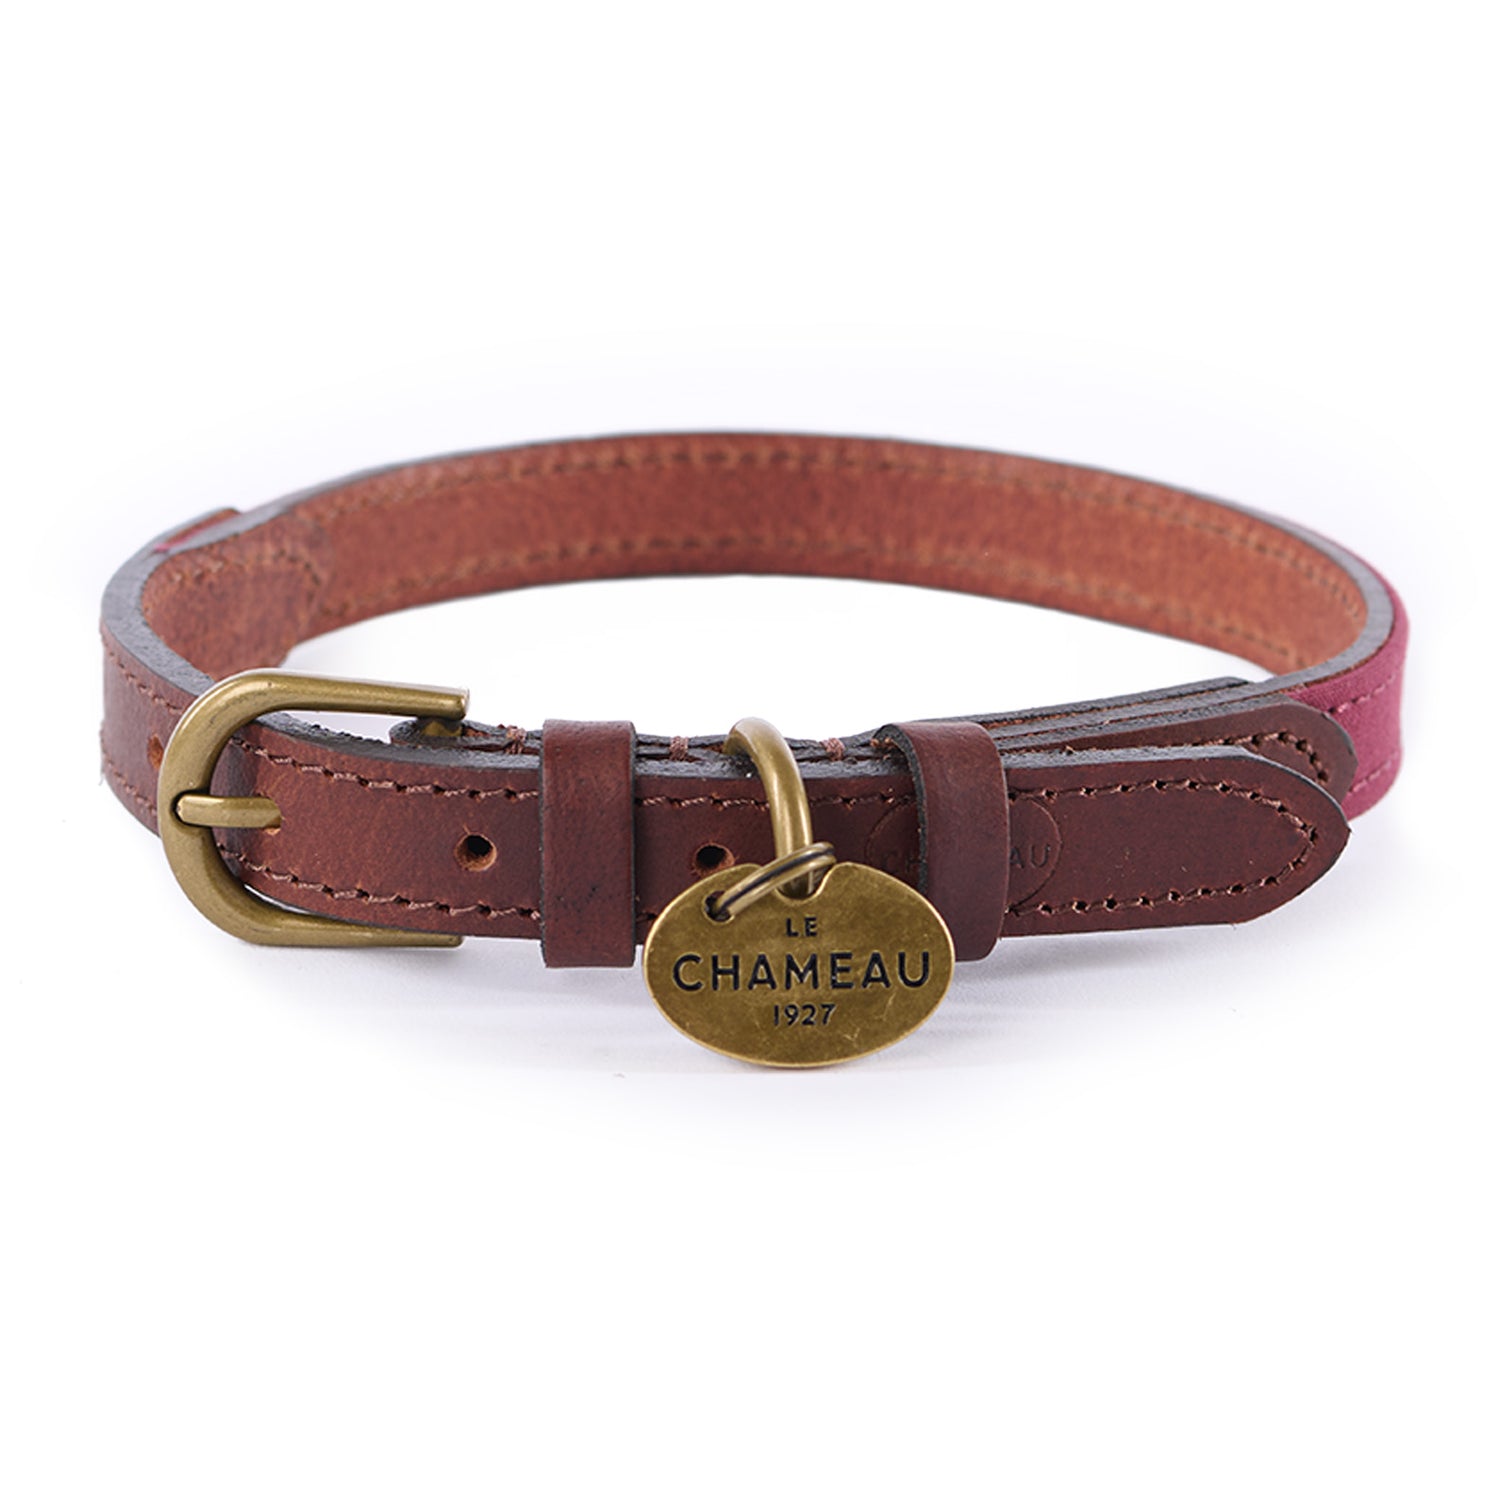 Le-Chameau-Small-Waxed-Cotton-and-Leather-Dog-Collar